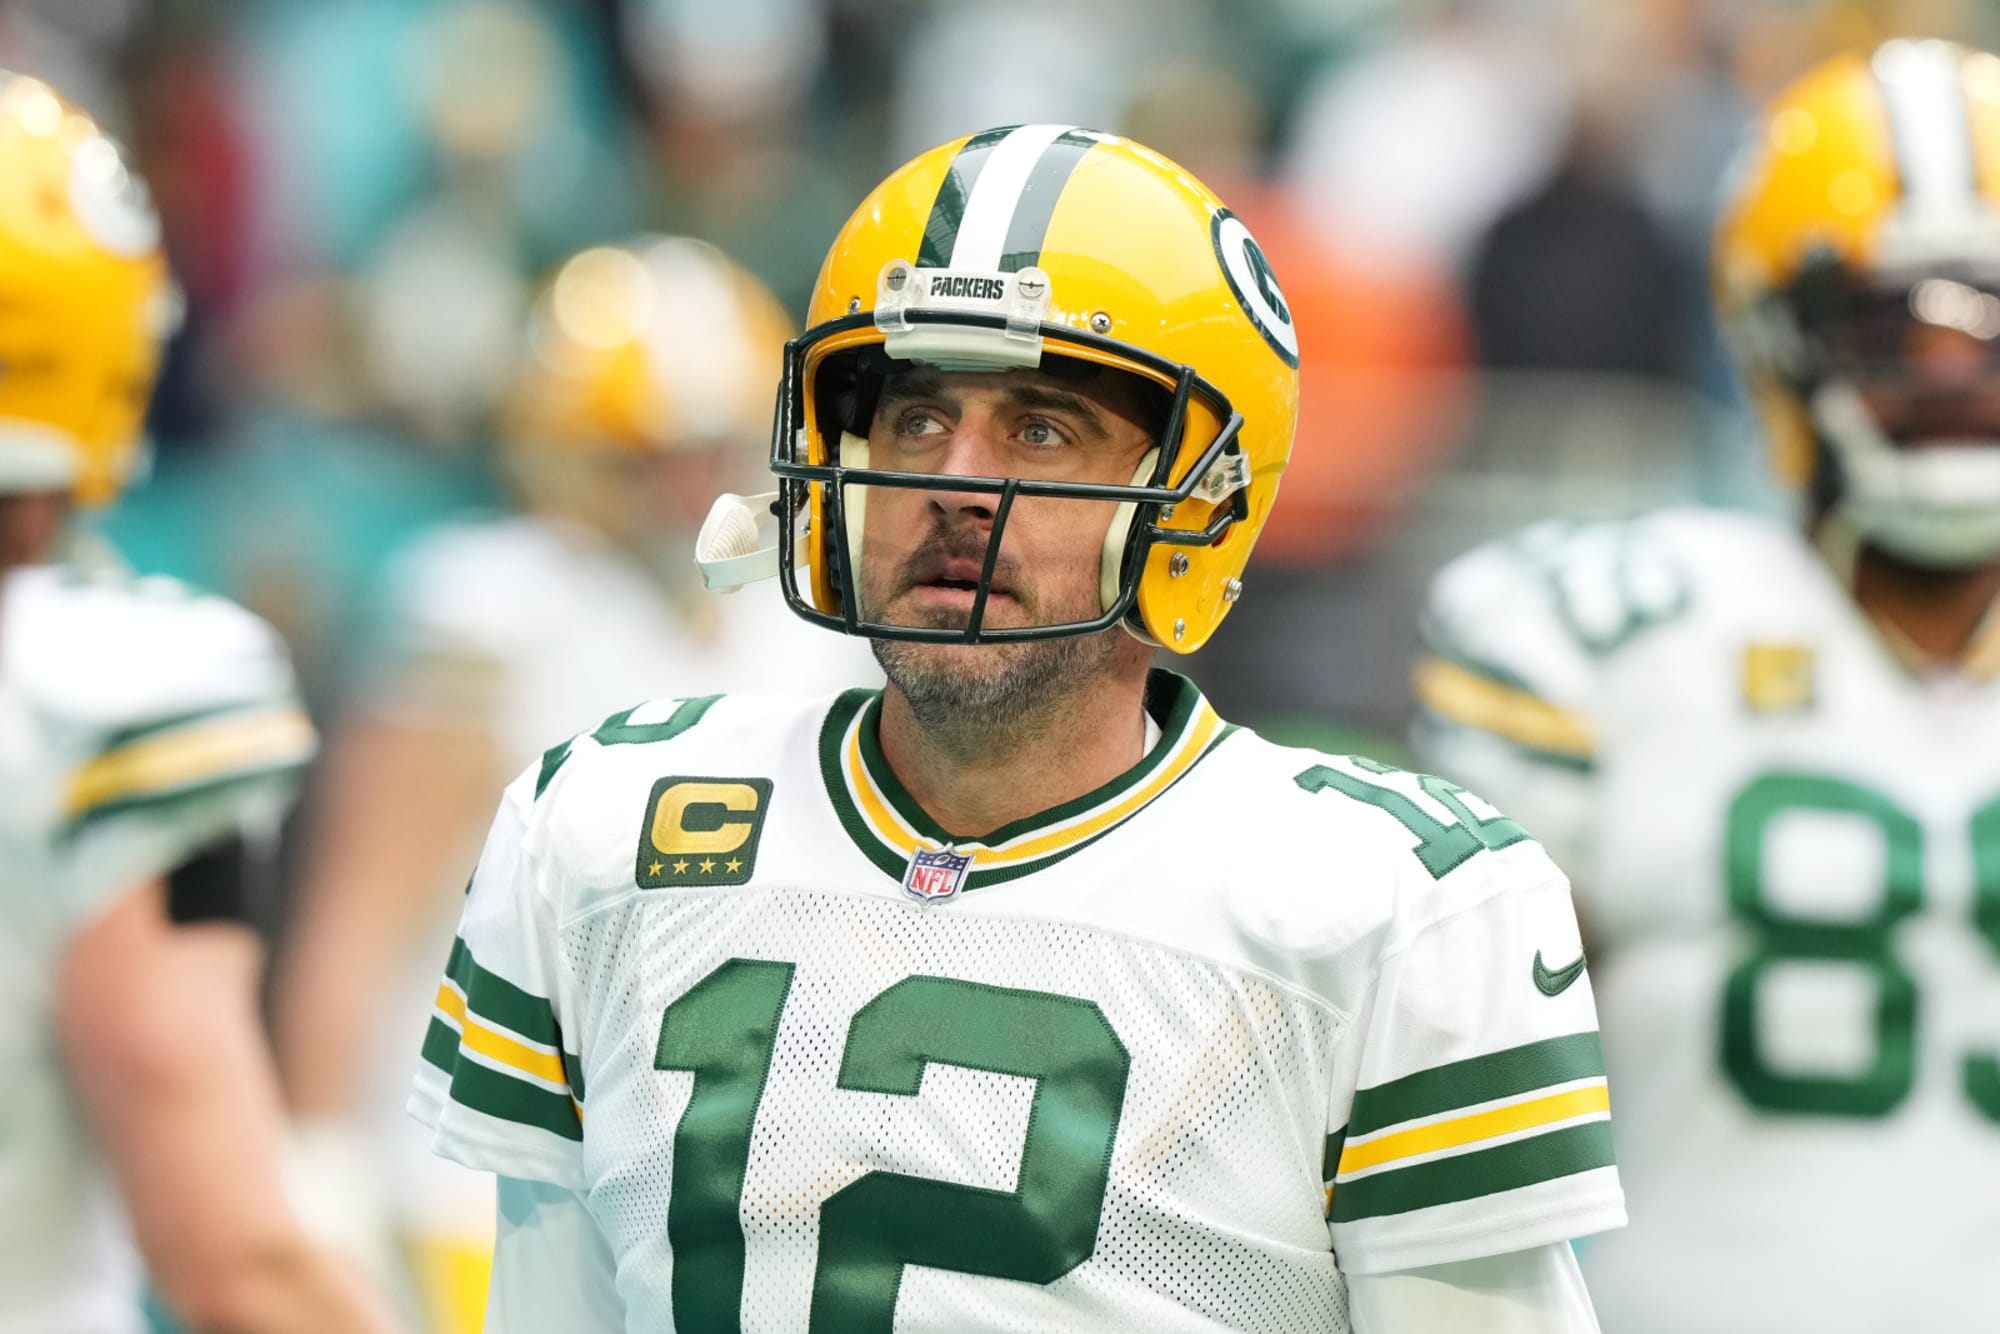 Aaron Rodgers has complete meltdown after missing wide open receiver (Video)